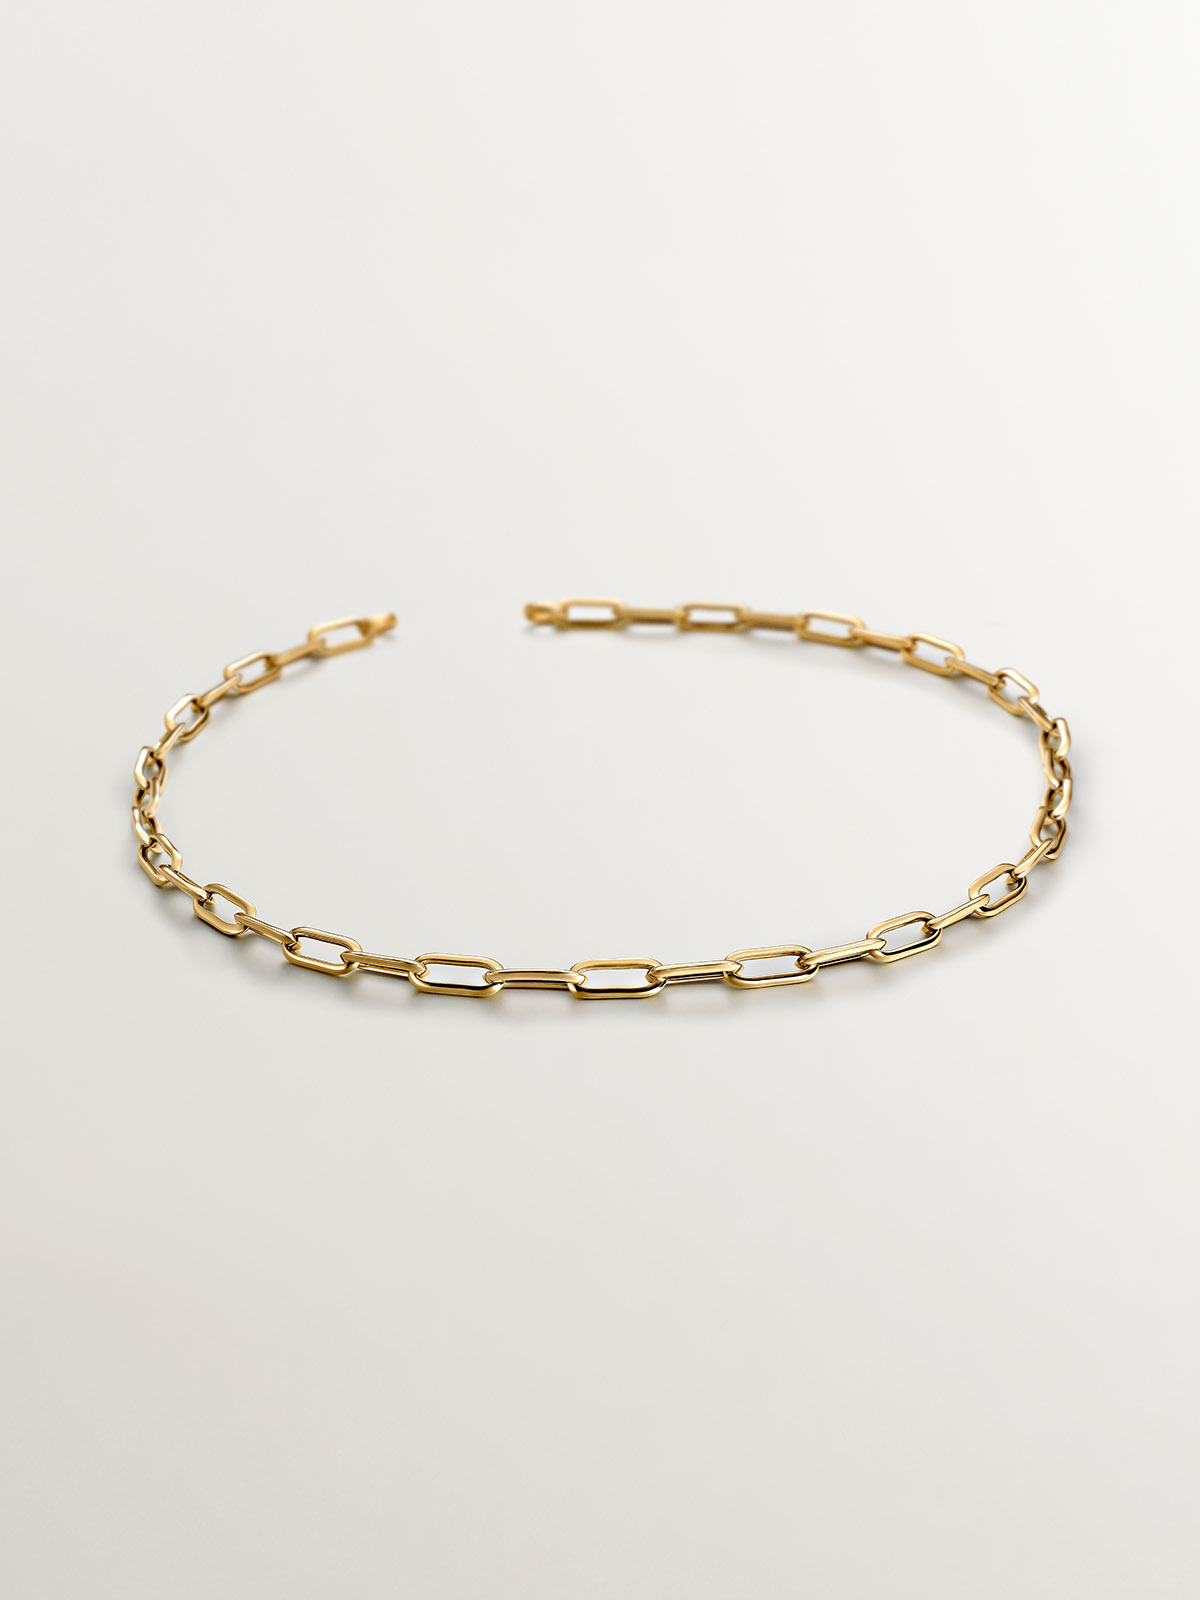 Chain of rectangular links made of 925 silver, coated in 18K yellow gold